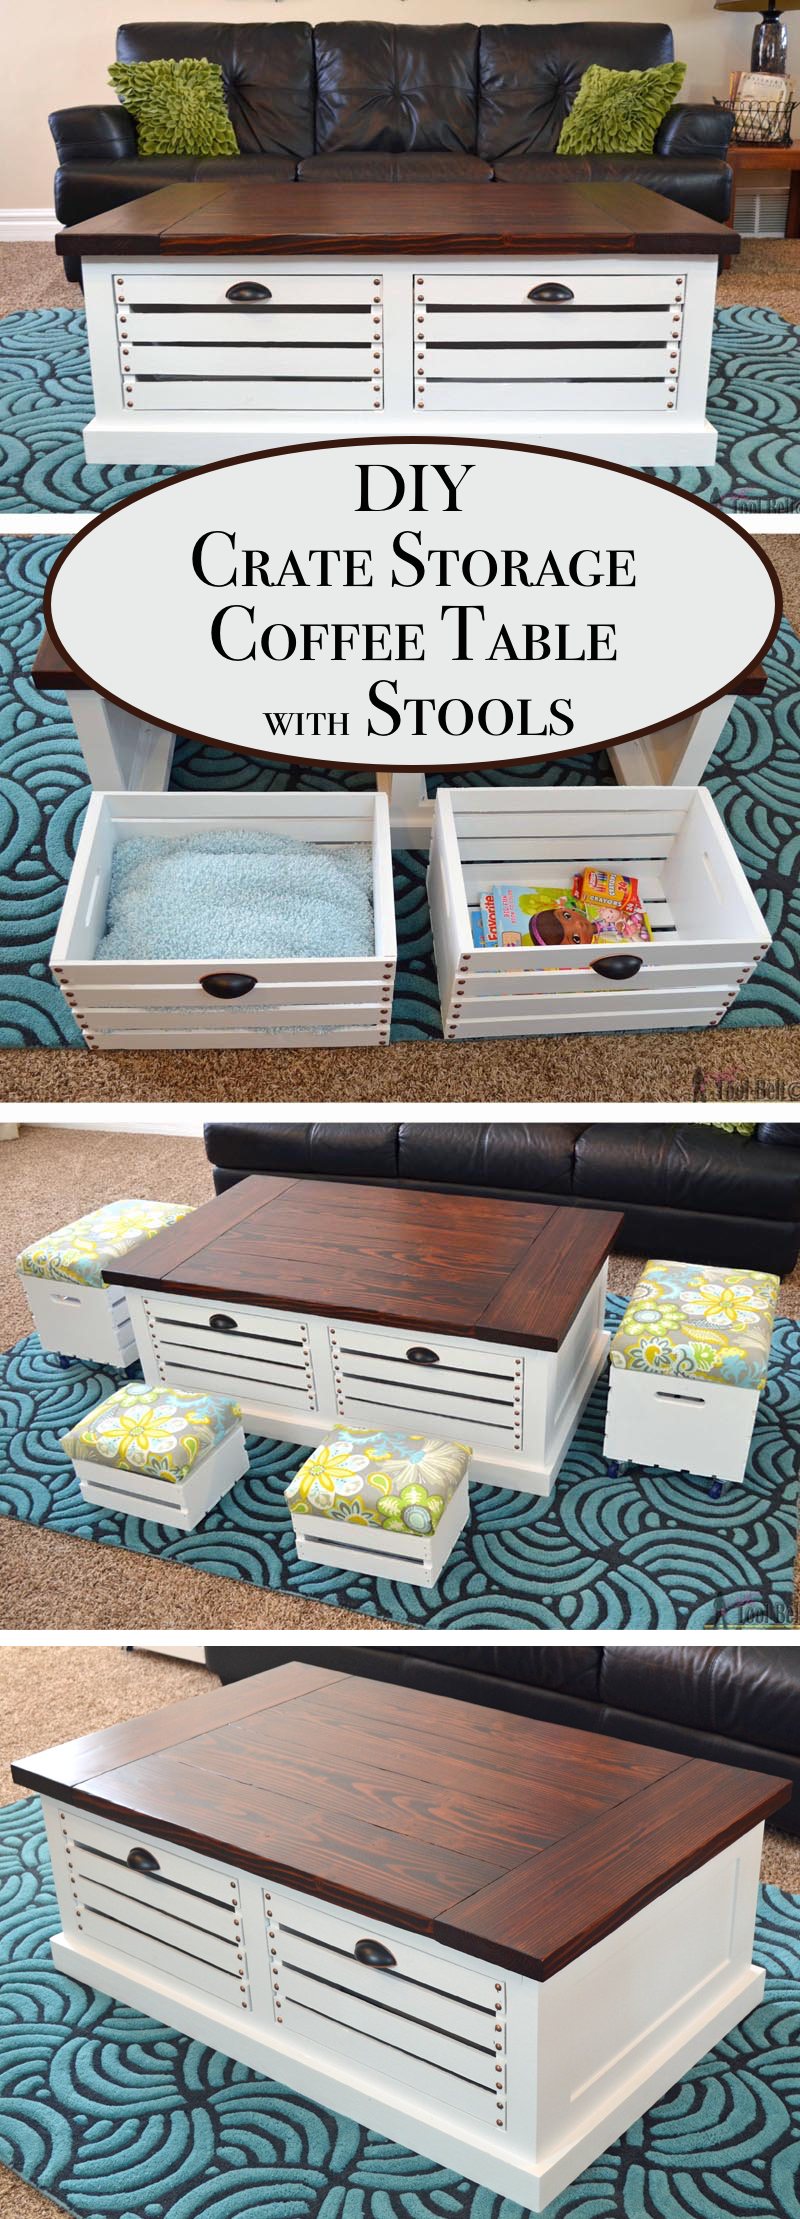 Crate Storage Coffee Table with Stools